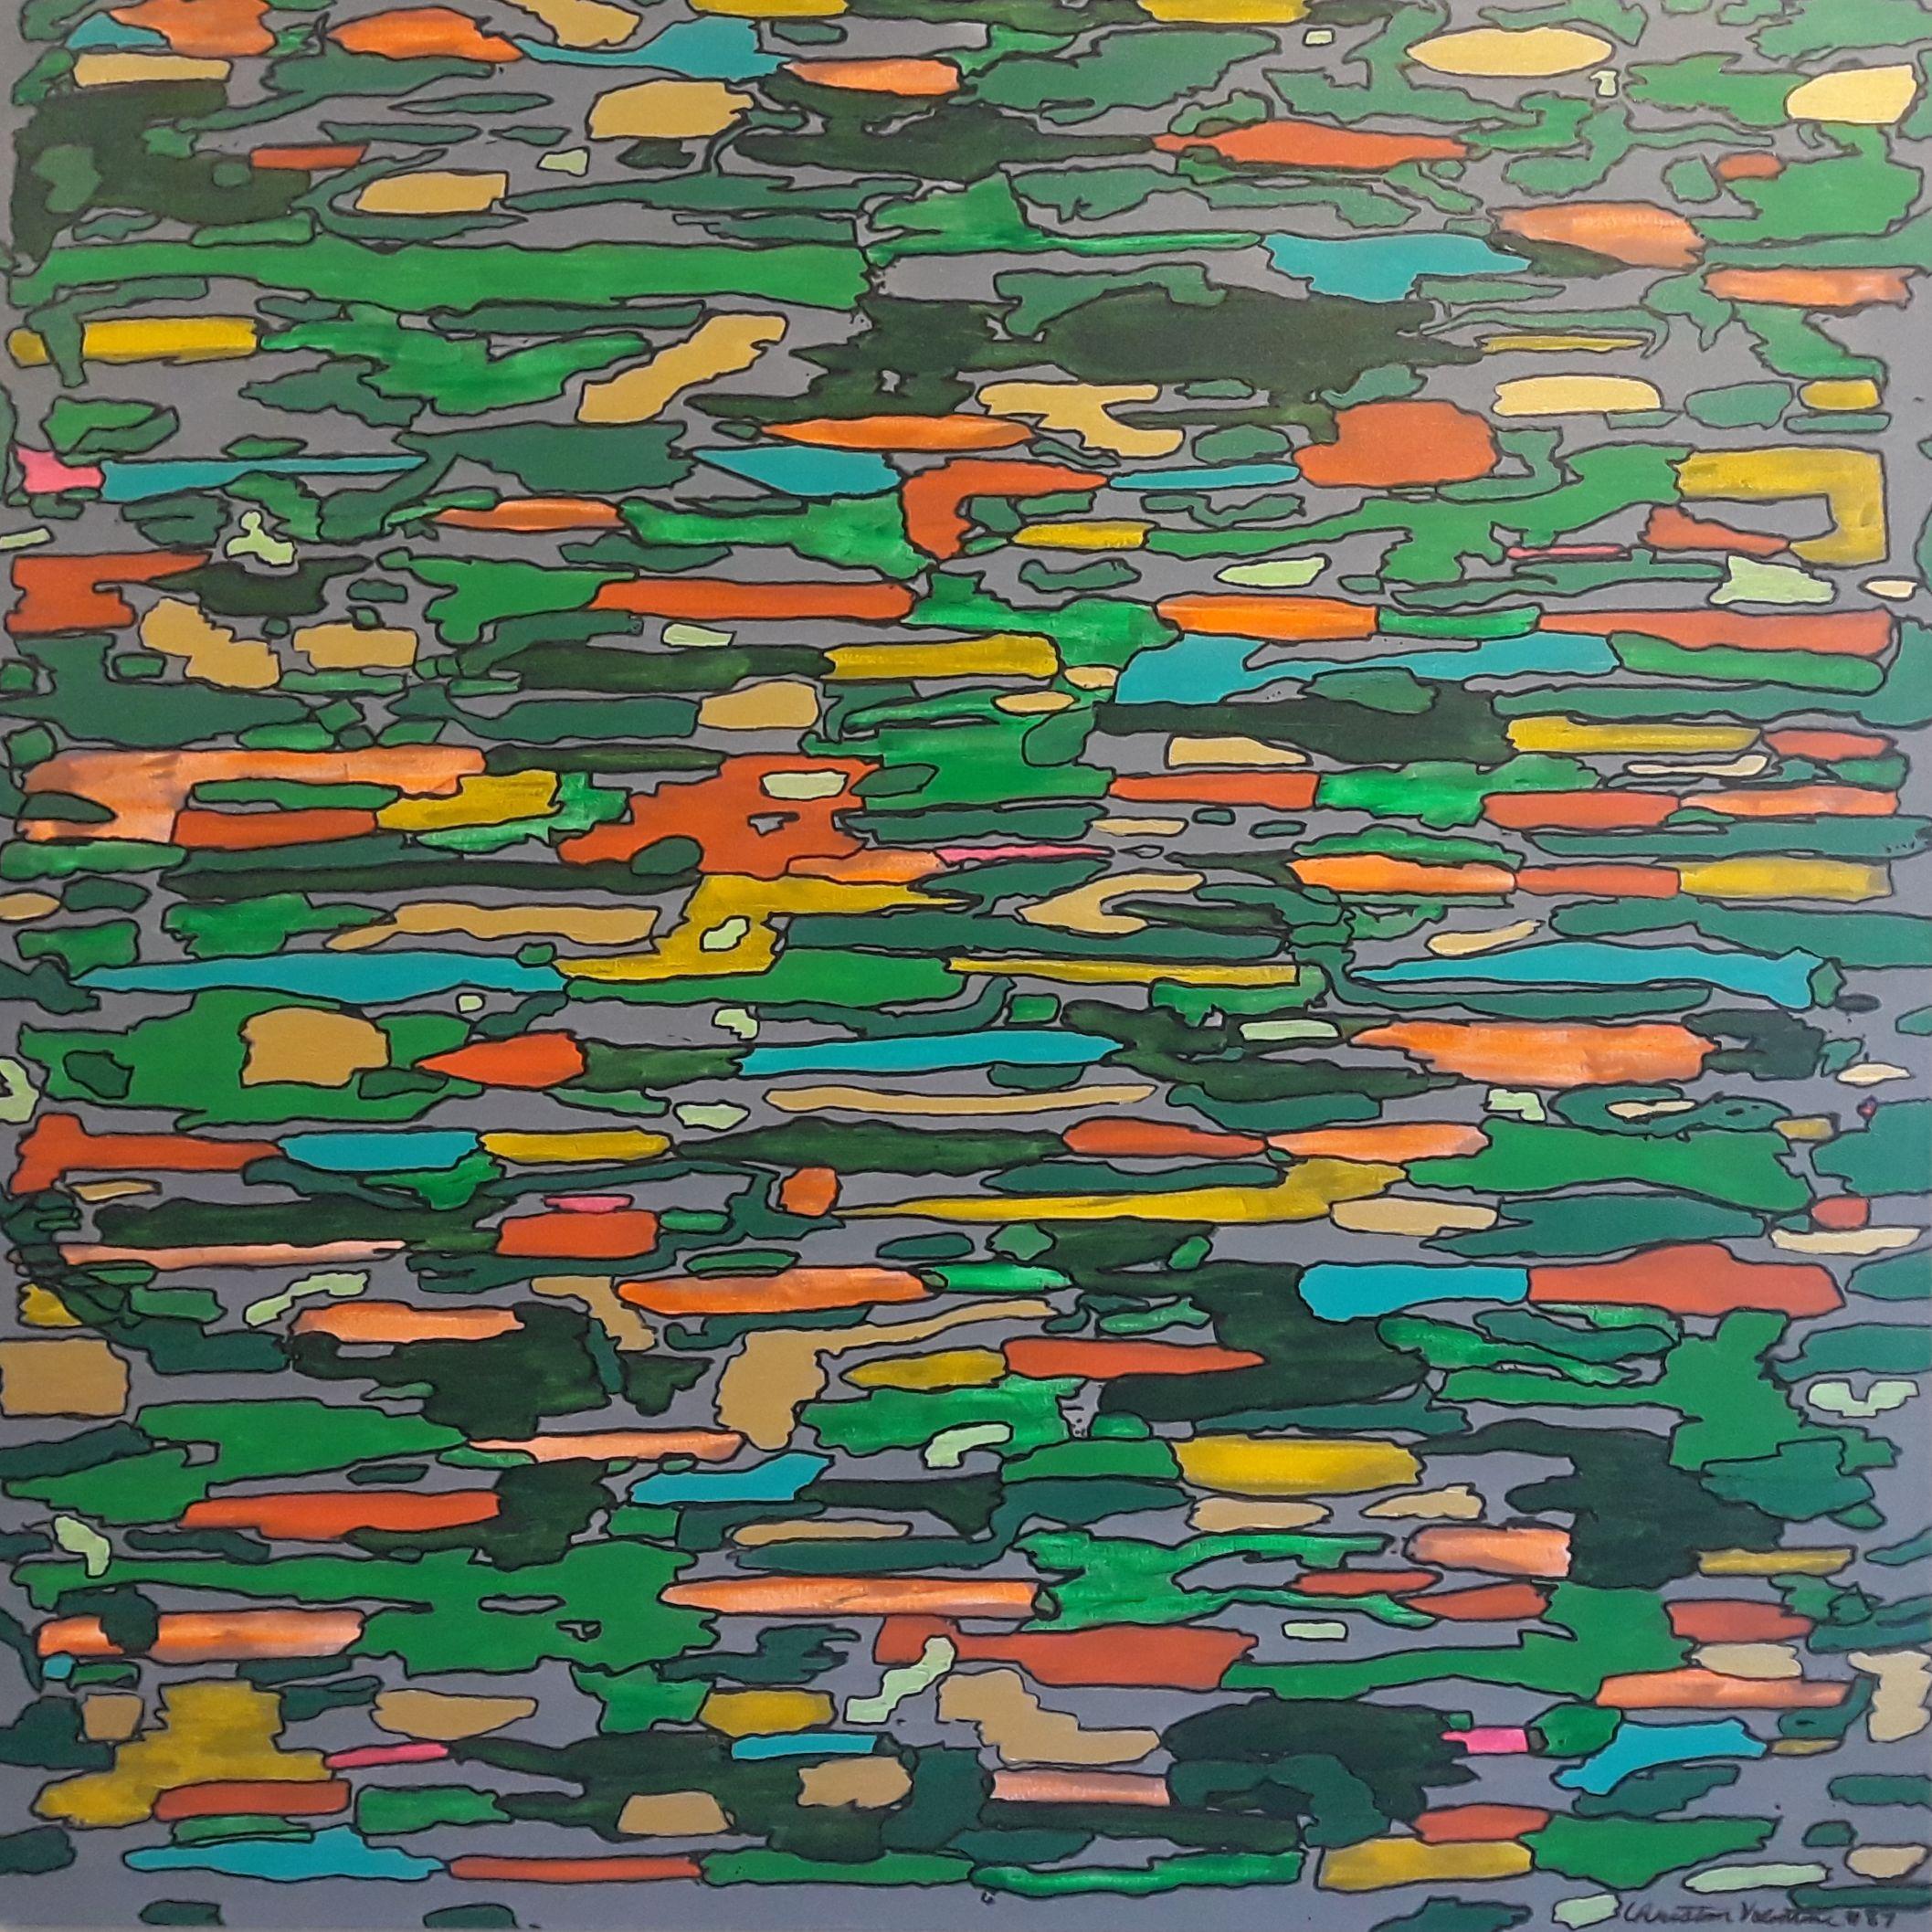 Christian Valentine Abstract Painting - Orange + Green, Painting, Acrylic on Canvas